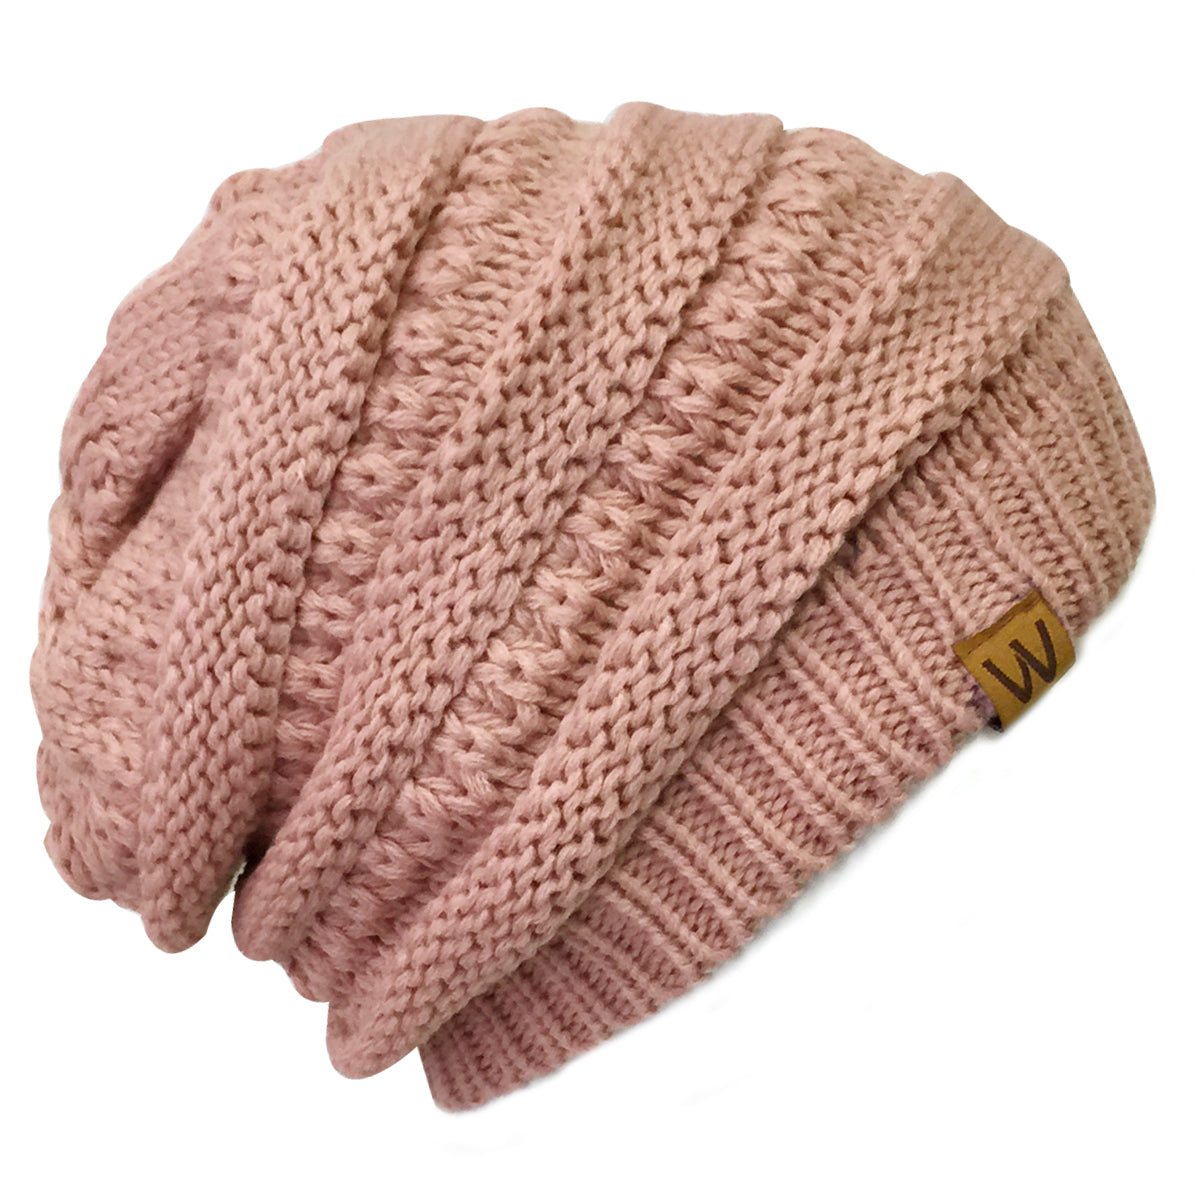 Wrapables Slouchy Winter Beanie Cap Hat